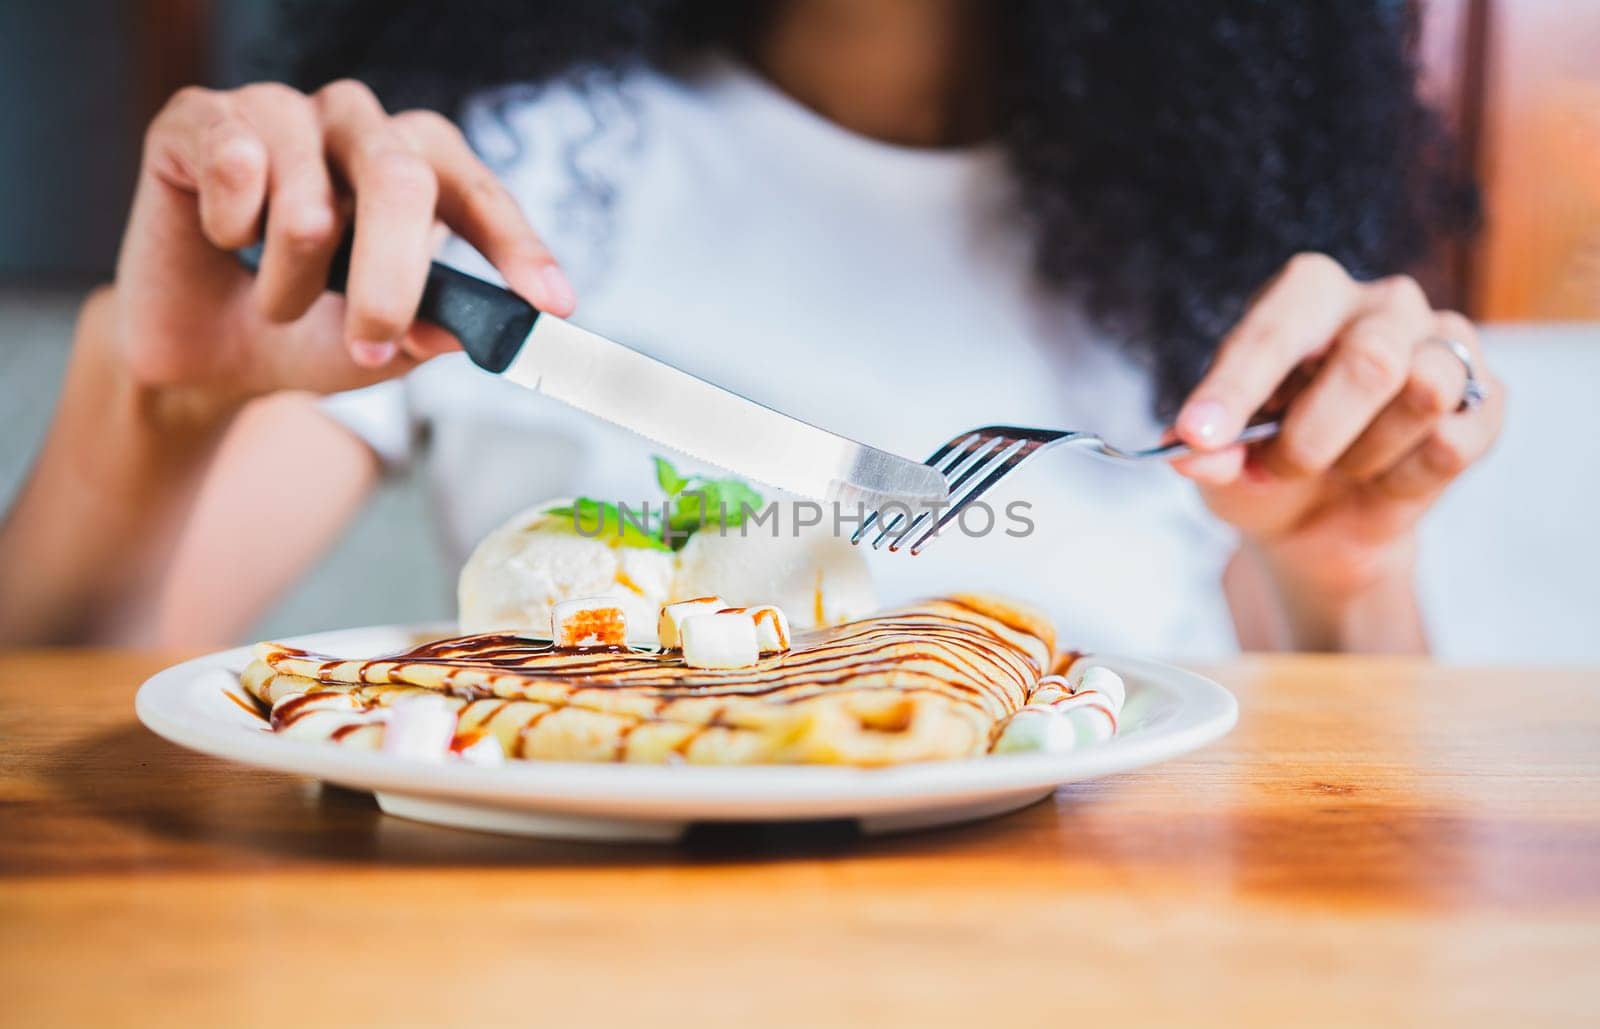 Woman hands eating chocolate crepe and ice cream with fork. Close up of woman eating a chocolate crepe with fork by isaiphoto